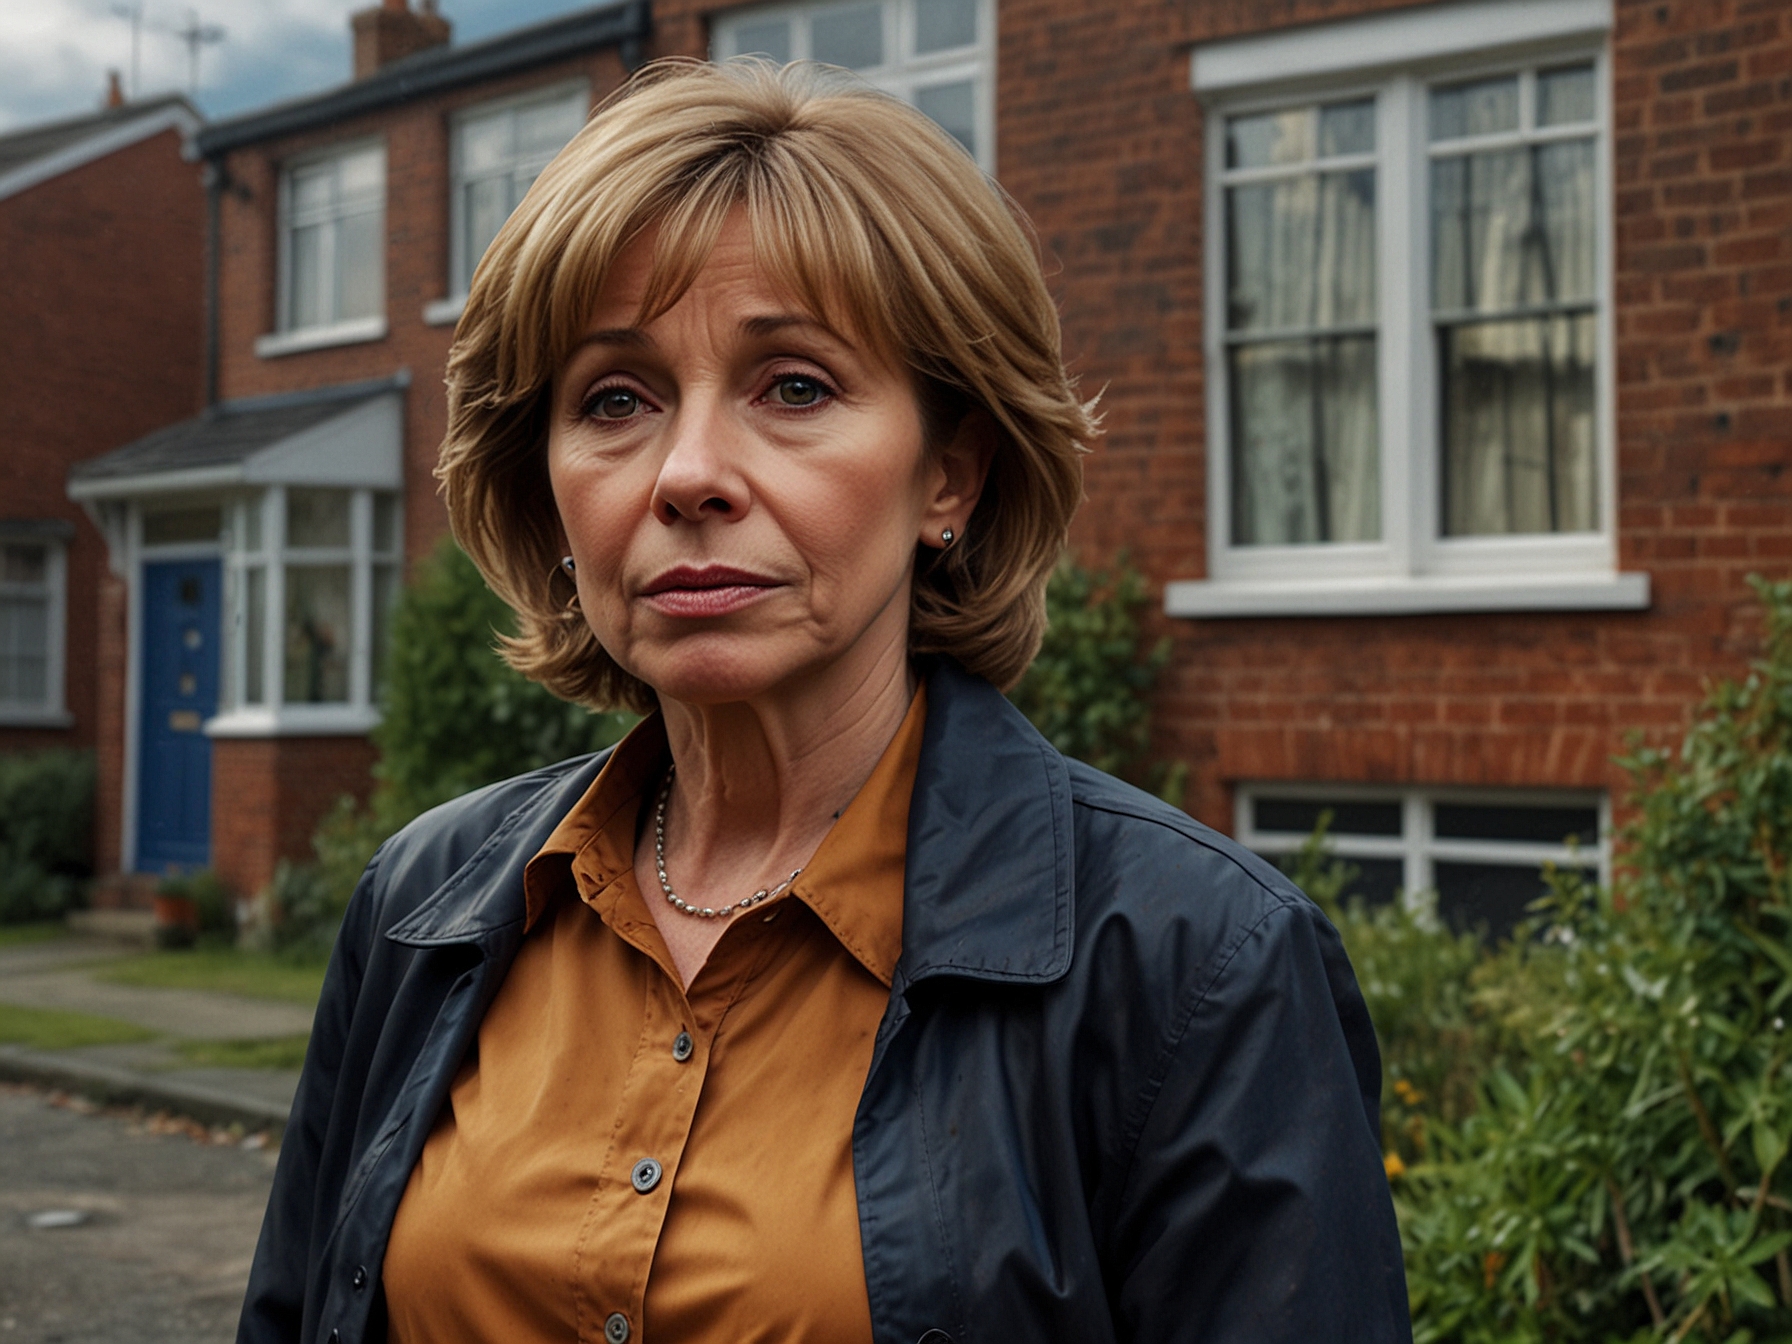 Gail Platt, the family matriarch, stands distraught outside their Weatherfield home, capturing the emotional weight of potentially losing the place they've called home for years.